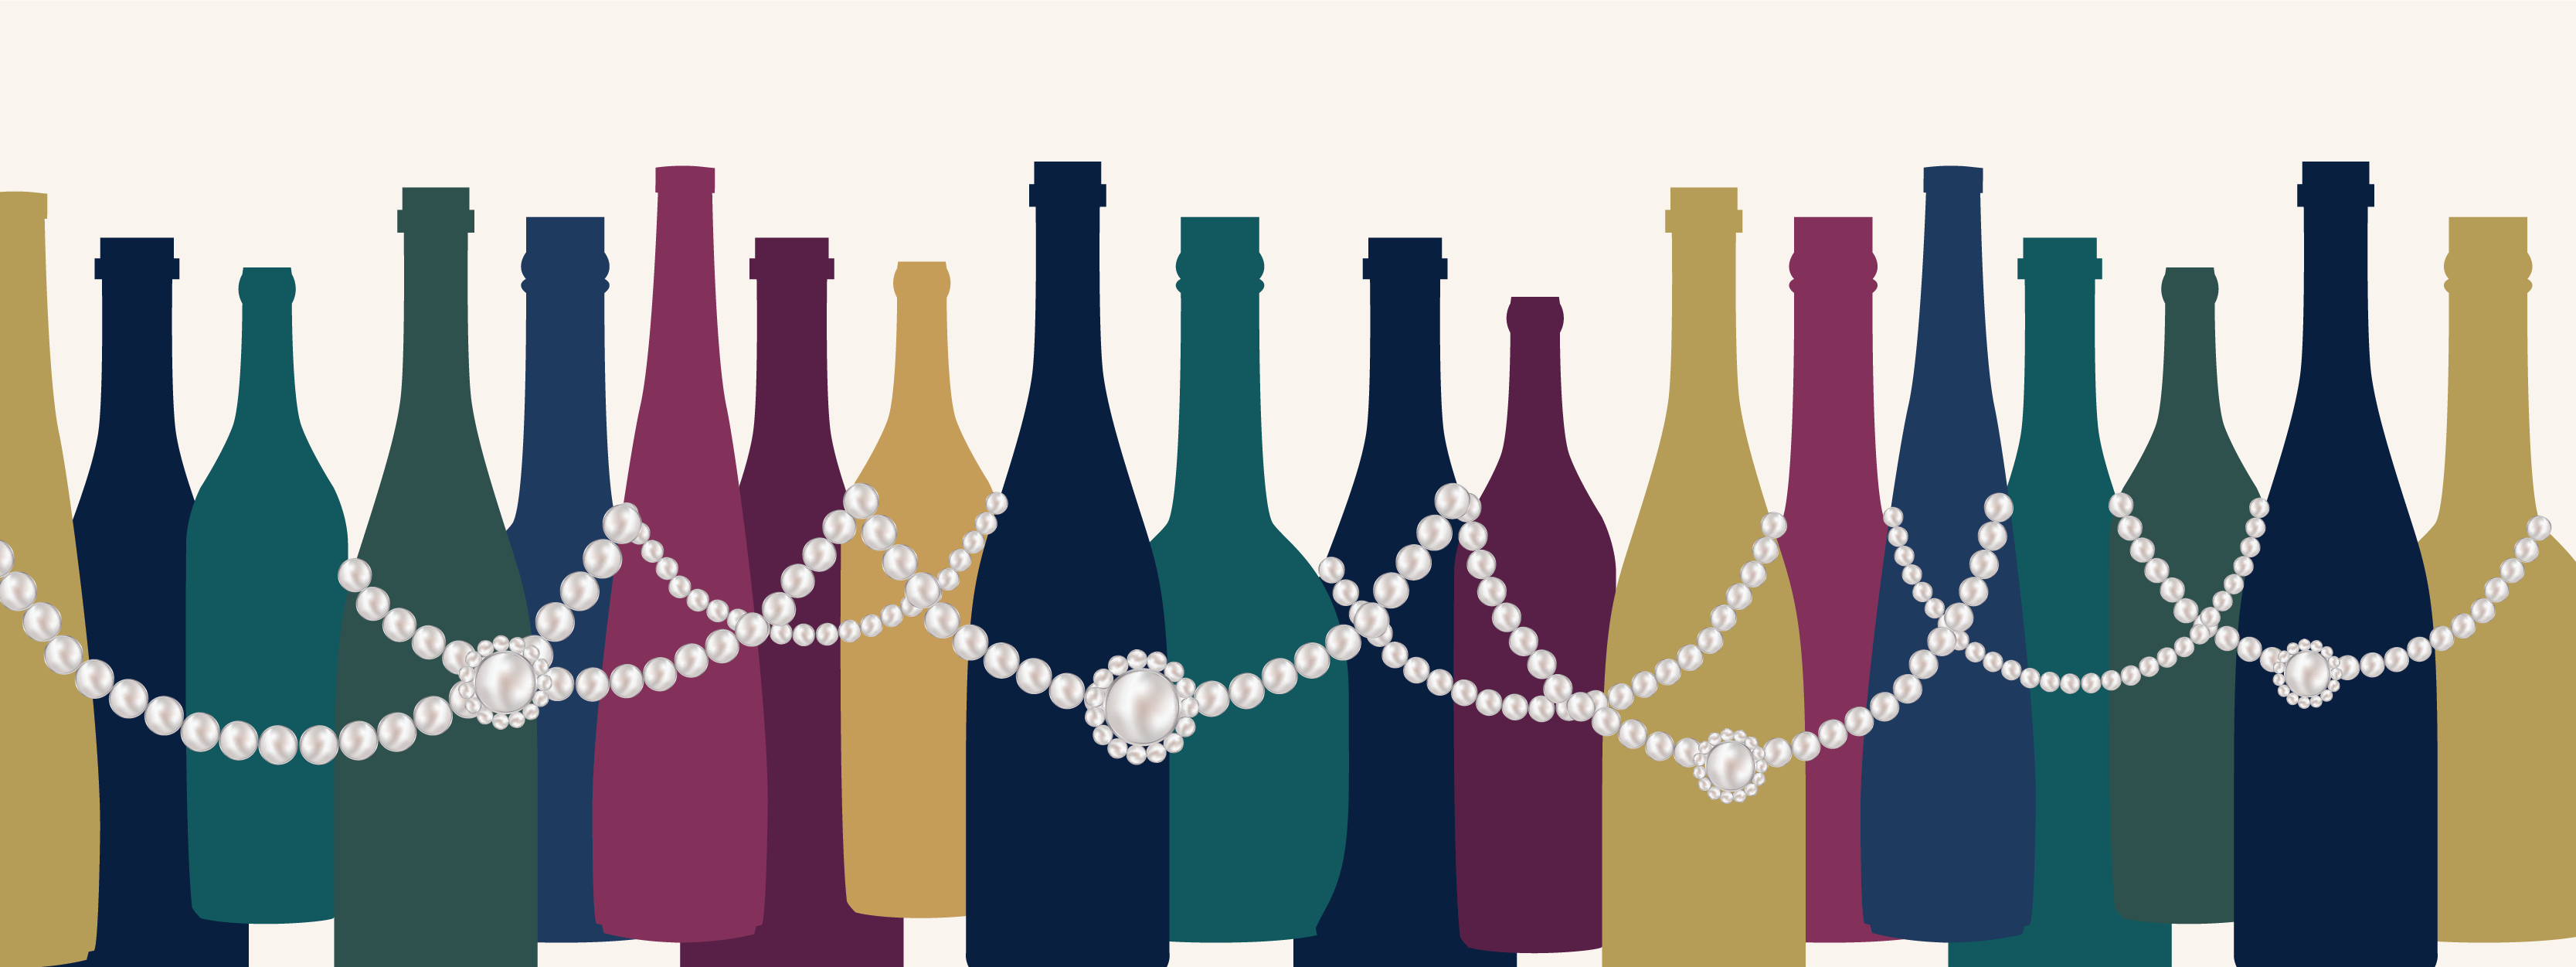 wine-bottles-multi-colored-with-pearl-necklace-draped-over